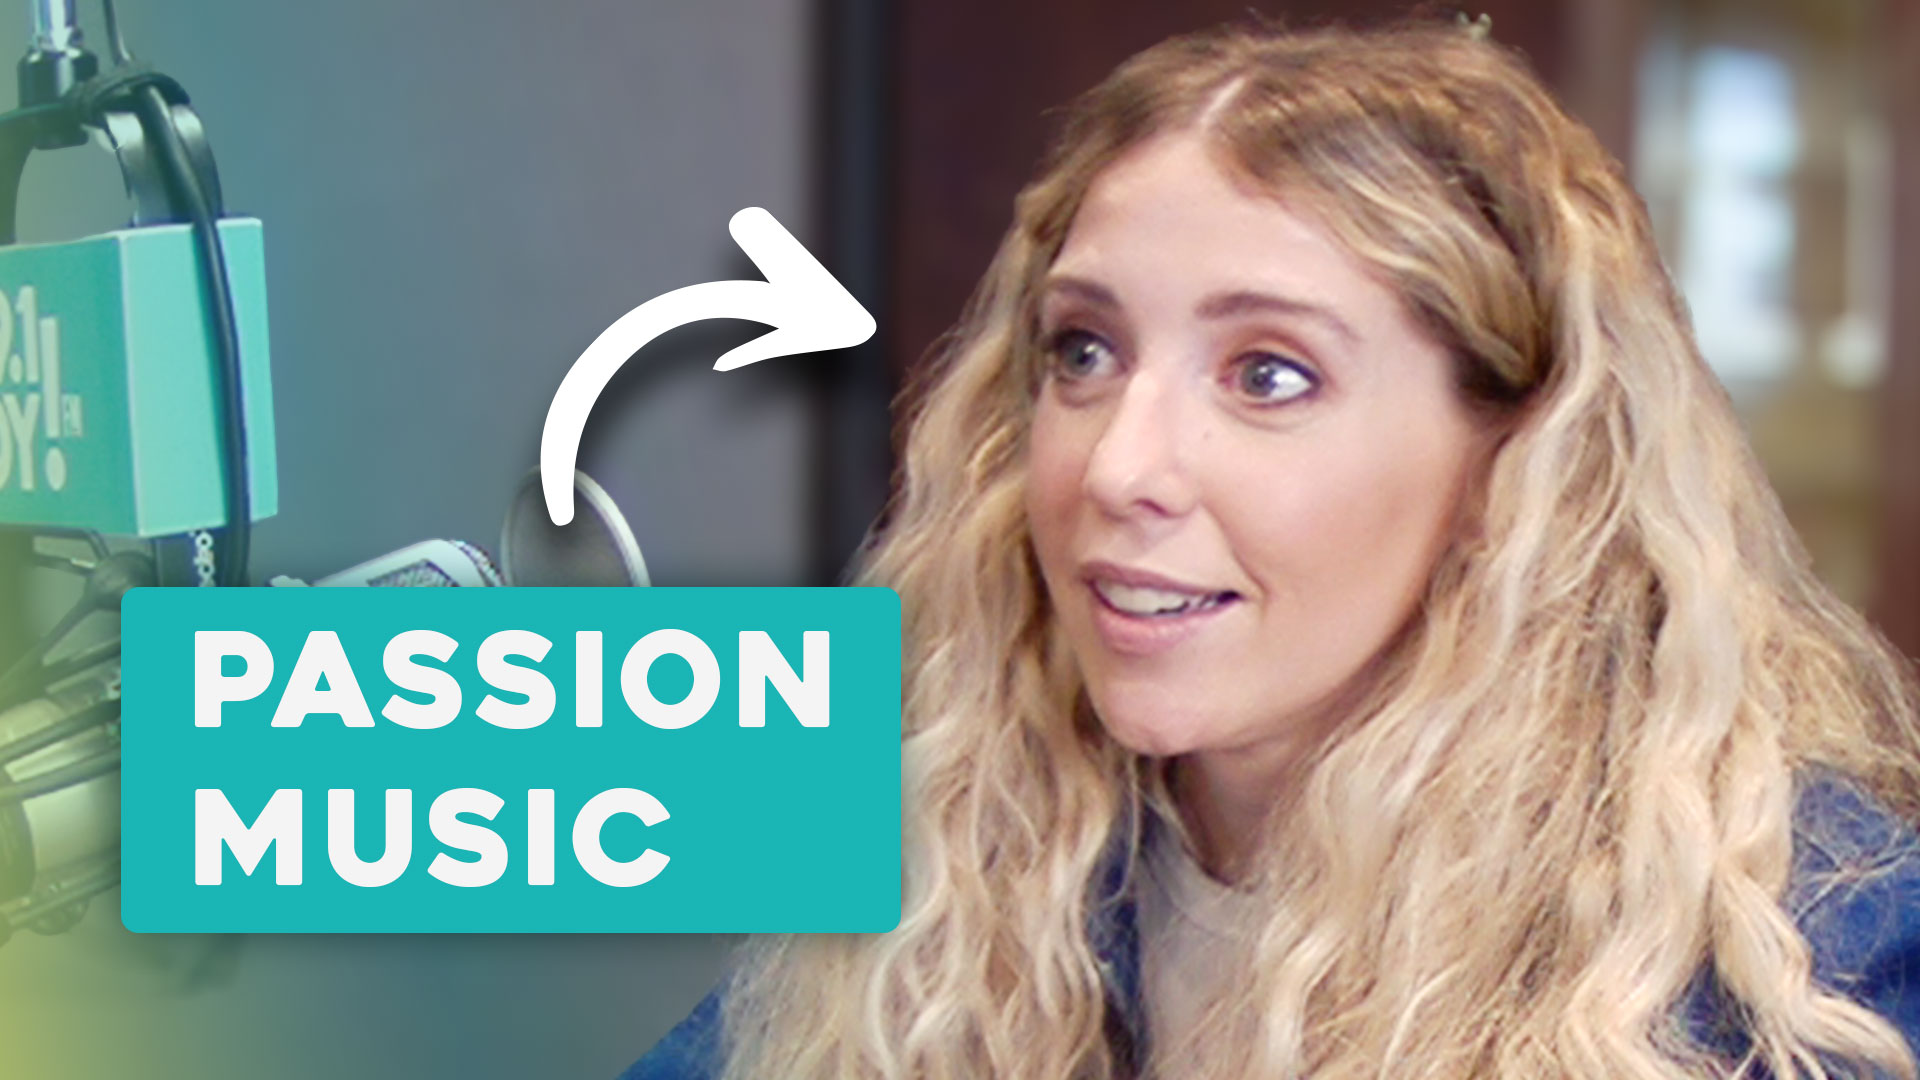 Worship Leader Reacts to Today’s Top Worship Songs (featuring Passion Music)